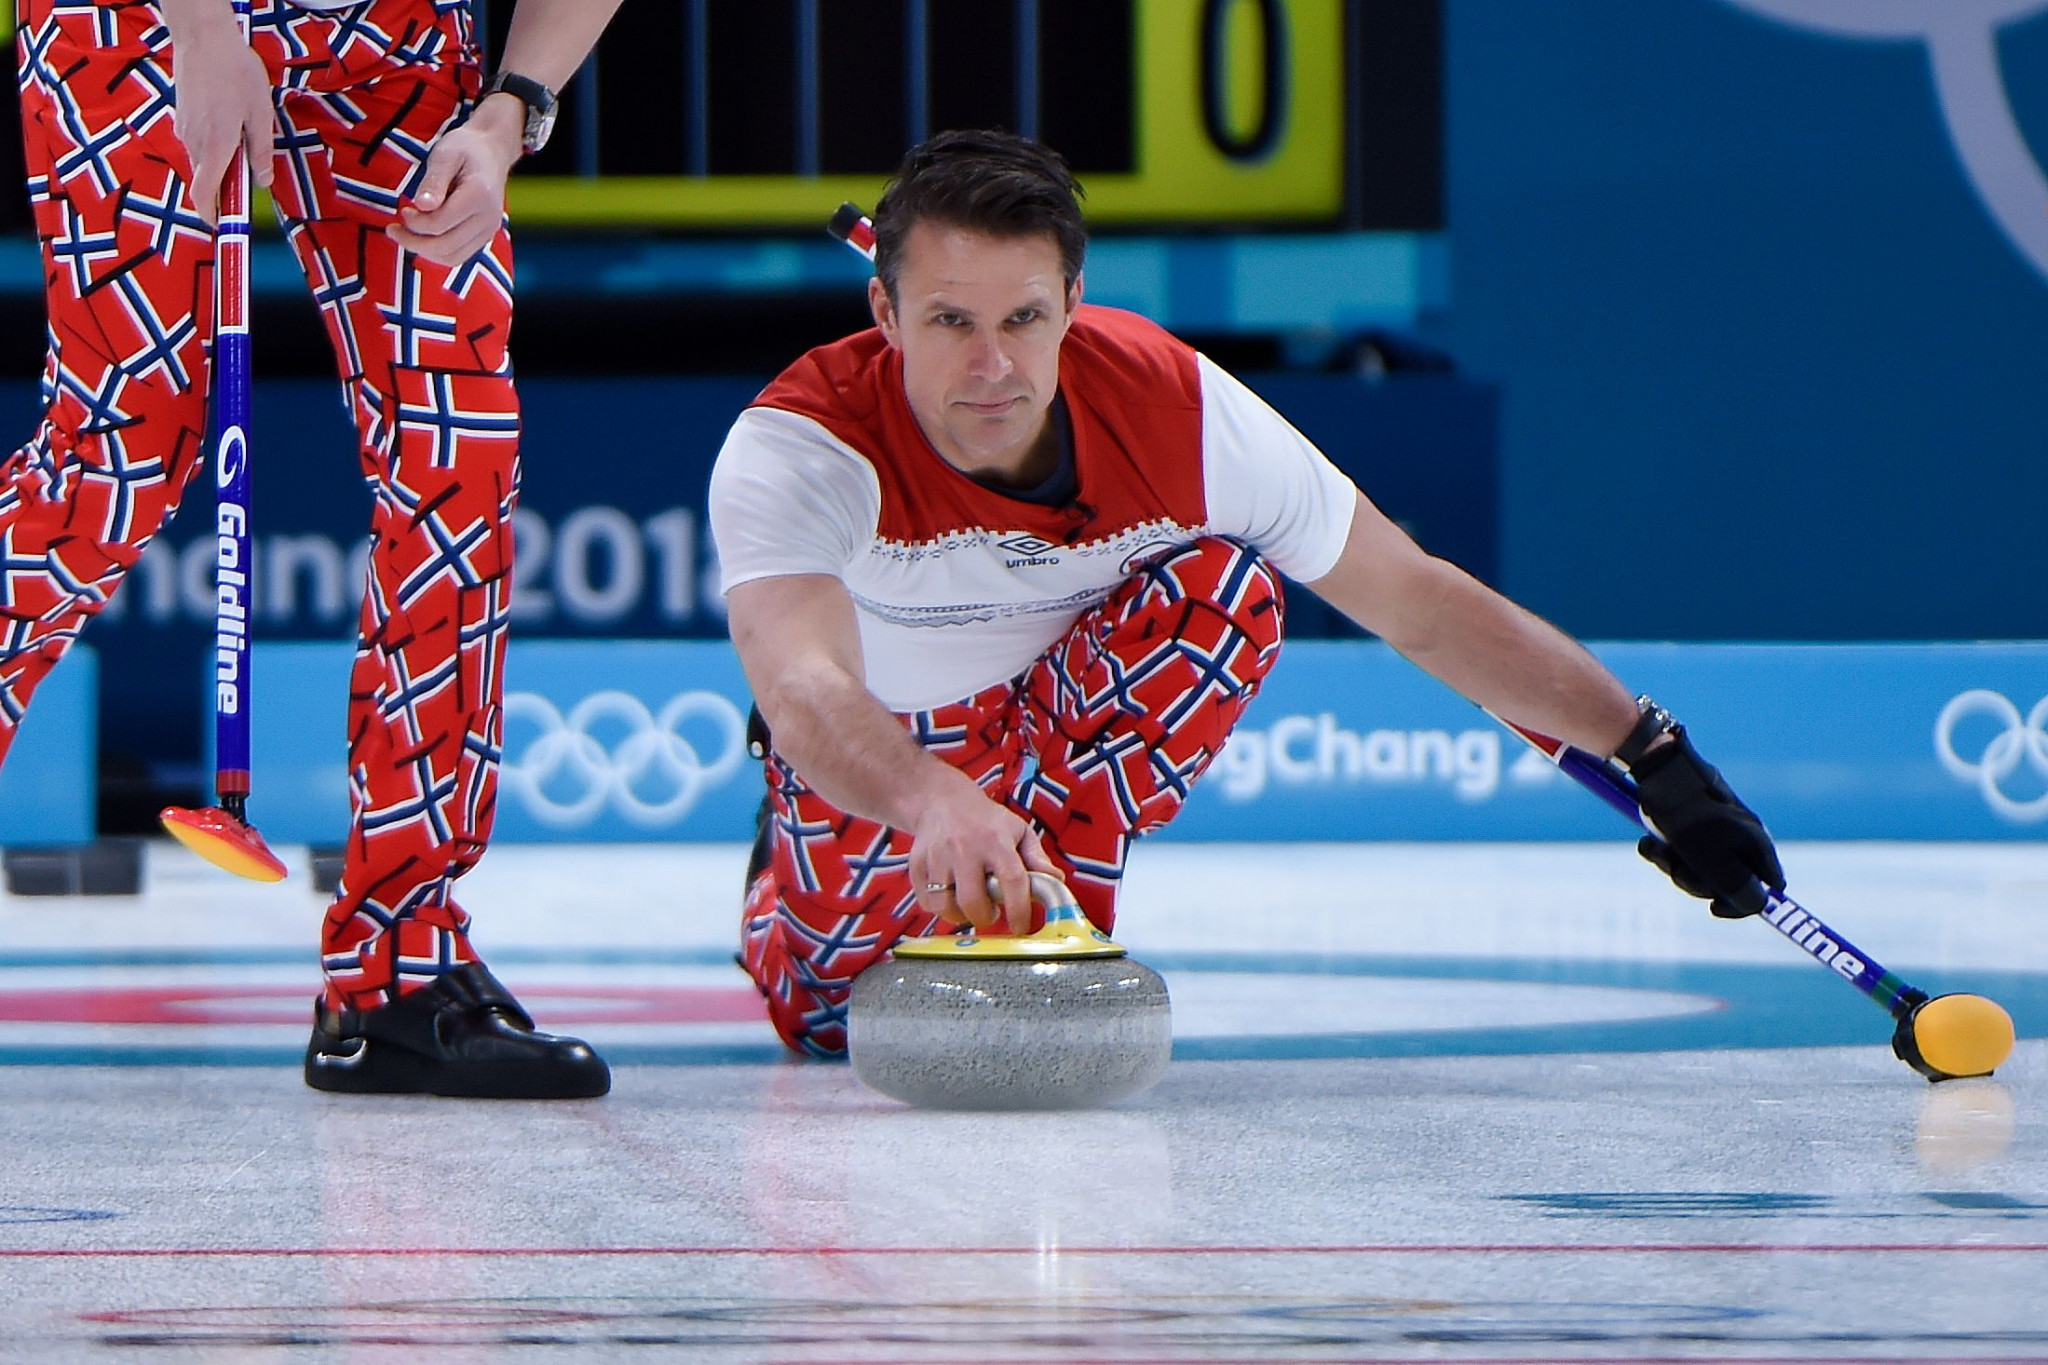 Norway's Thomas Ulsrud is set to make his mixed doubles debut at the World Cup in Jönköping ©Getty Images